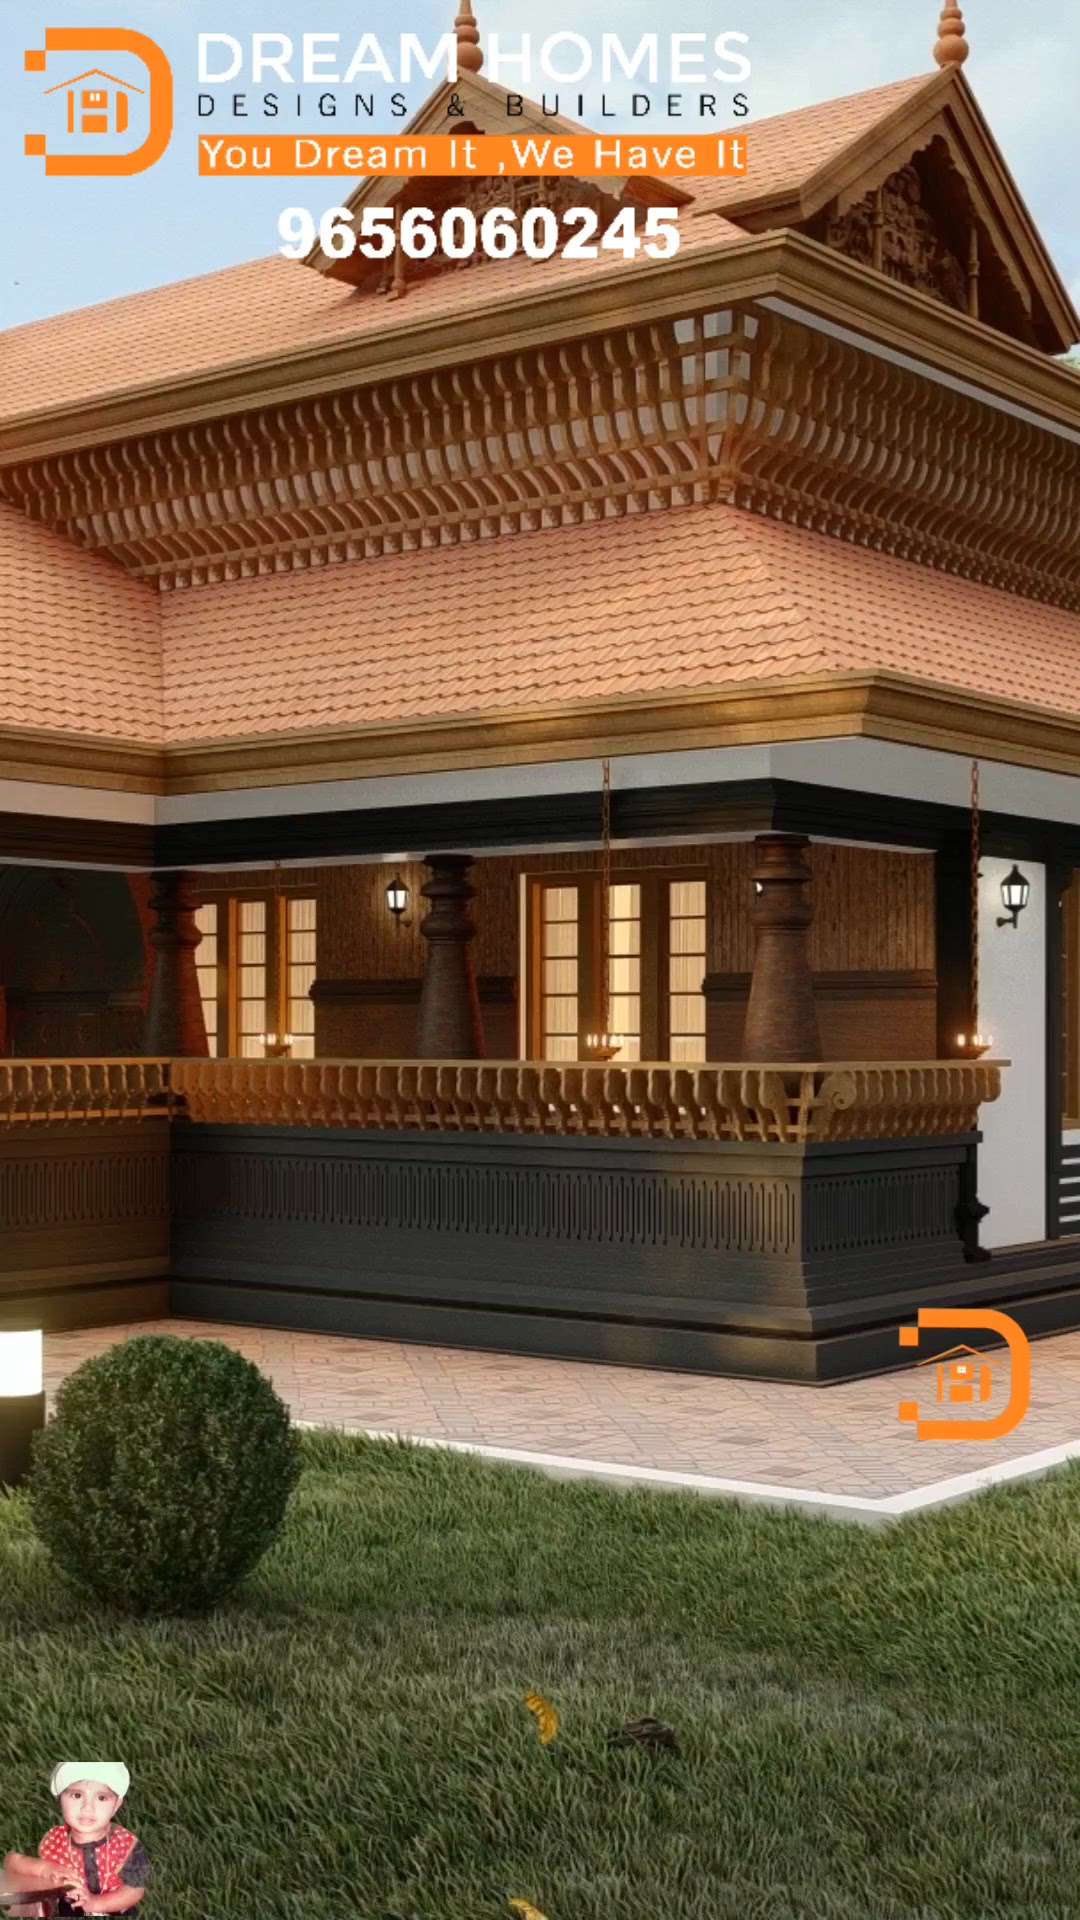 💞Happy Mother's Day🥰

"Kerala's No 1 Architect for Traditional Homes"

"DREAM HOMES DESIGNS & BUILDERS "
You Dream It, We Have It'

A beautiful traditional structure  will be completed only with the presence of a good Architect and pure Vasthu Sastra.

Dream Homes will always be there whenever we are needed.

No Compromise on Quality, Sincerity & Efficiency.

We are providing service to all over India 
No Compromise on Quality, Sincerity & Efficiency.

For more info 
9656060245
7902453187